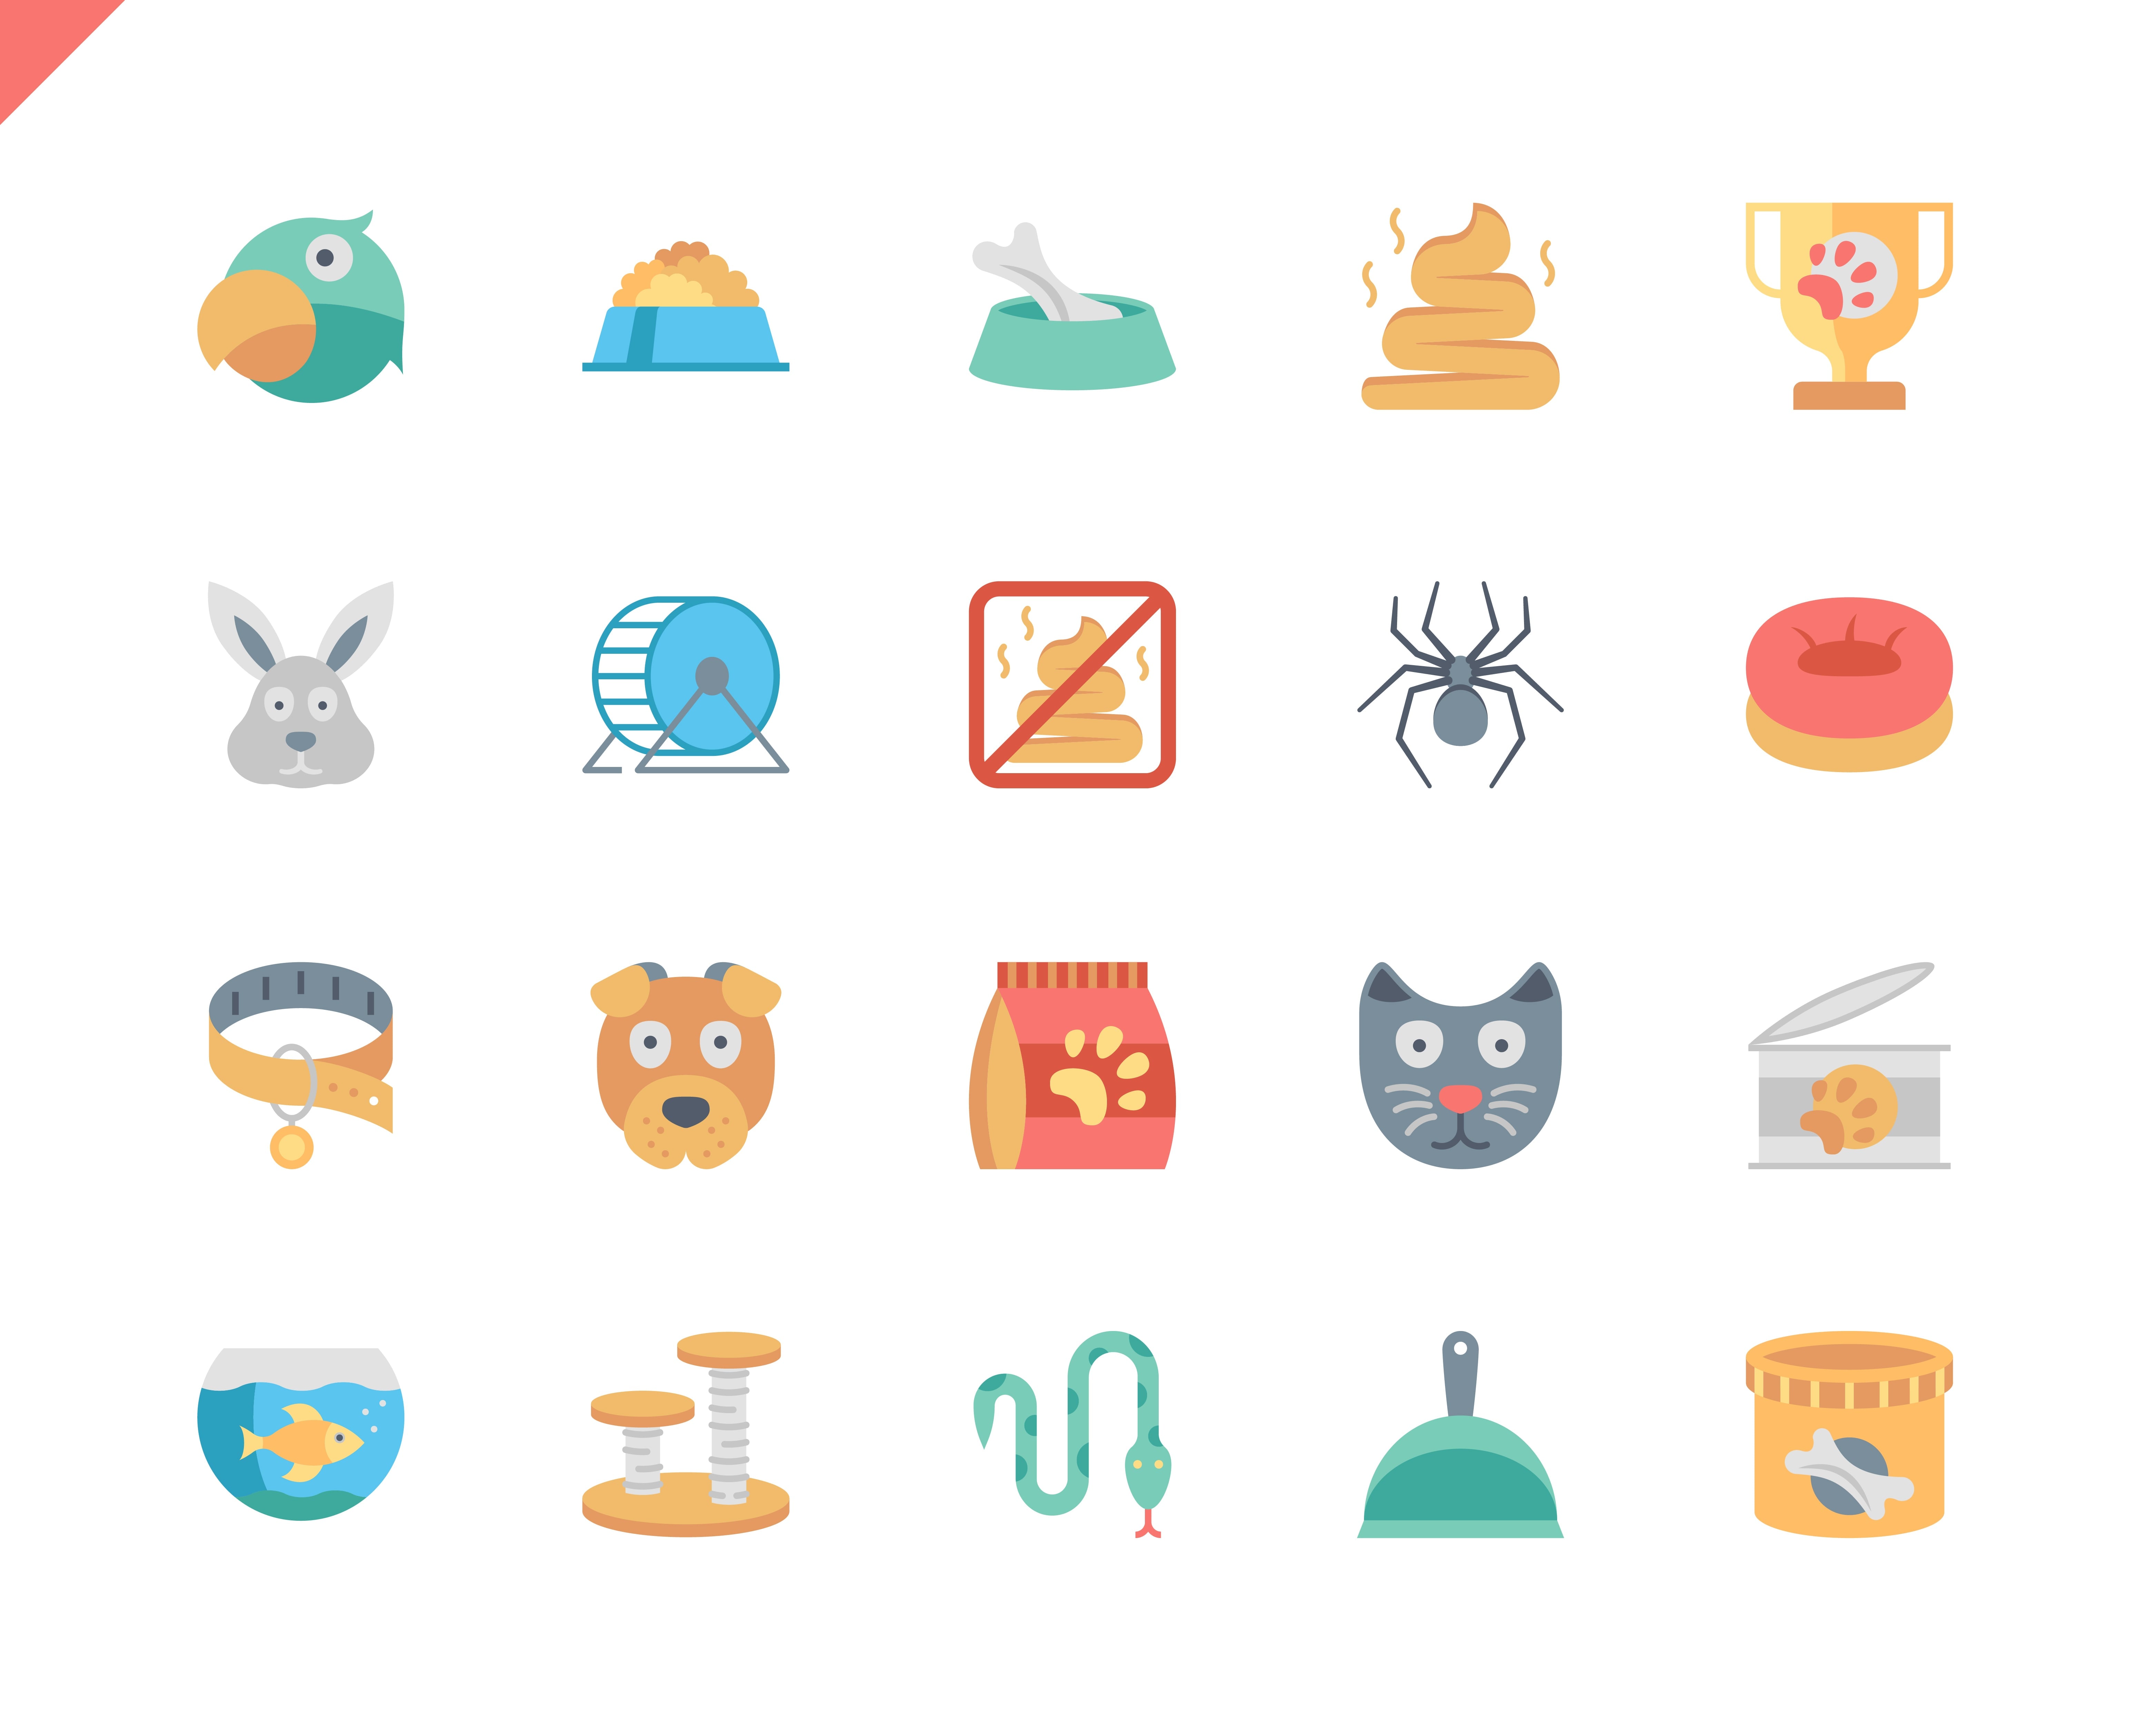 Simple Set Pen and Animal Flat Icons for Website and Mobile Apps. Contains such Icons as Scratcher, Dog, Cat, Bowl, Bird, Spider. 48x48 Pixel Perfect. Vector illustration.